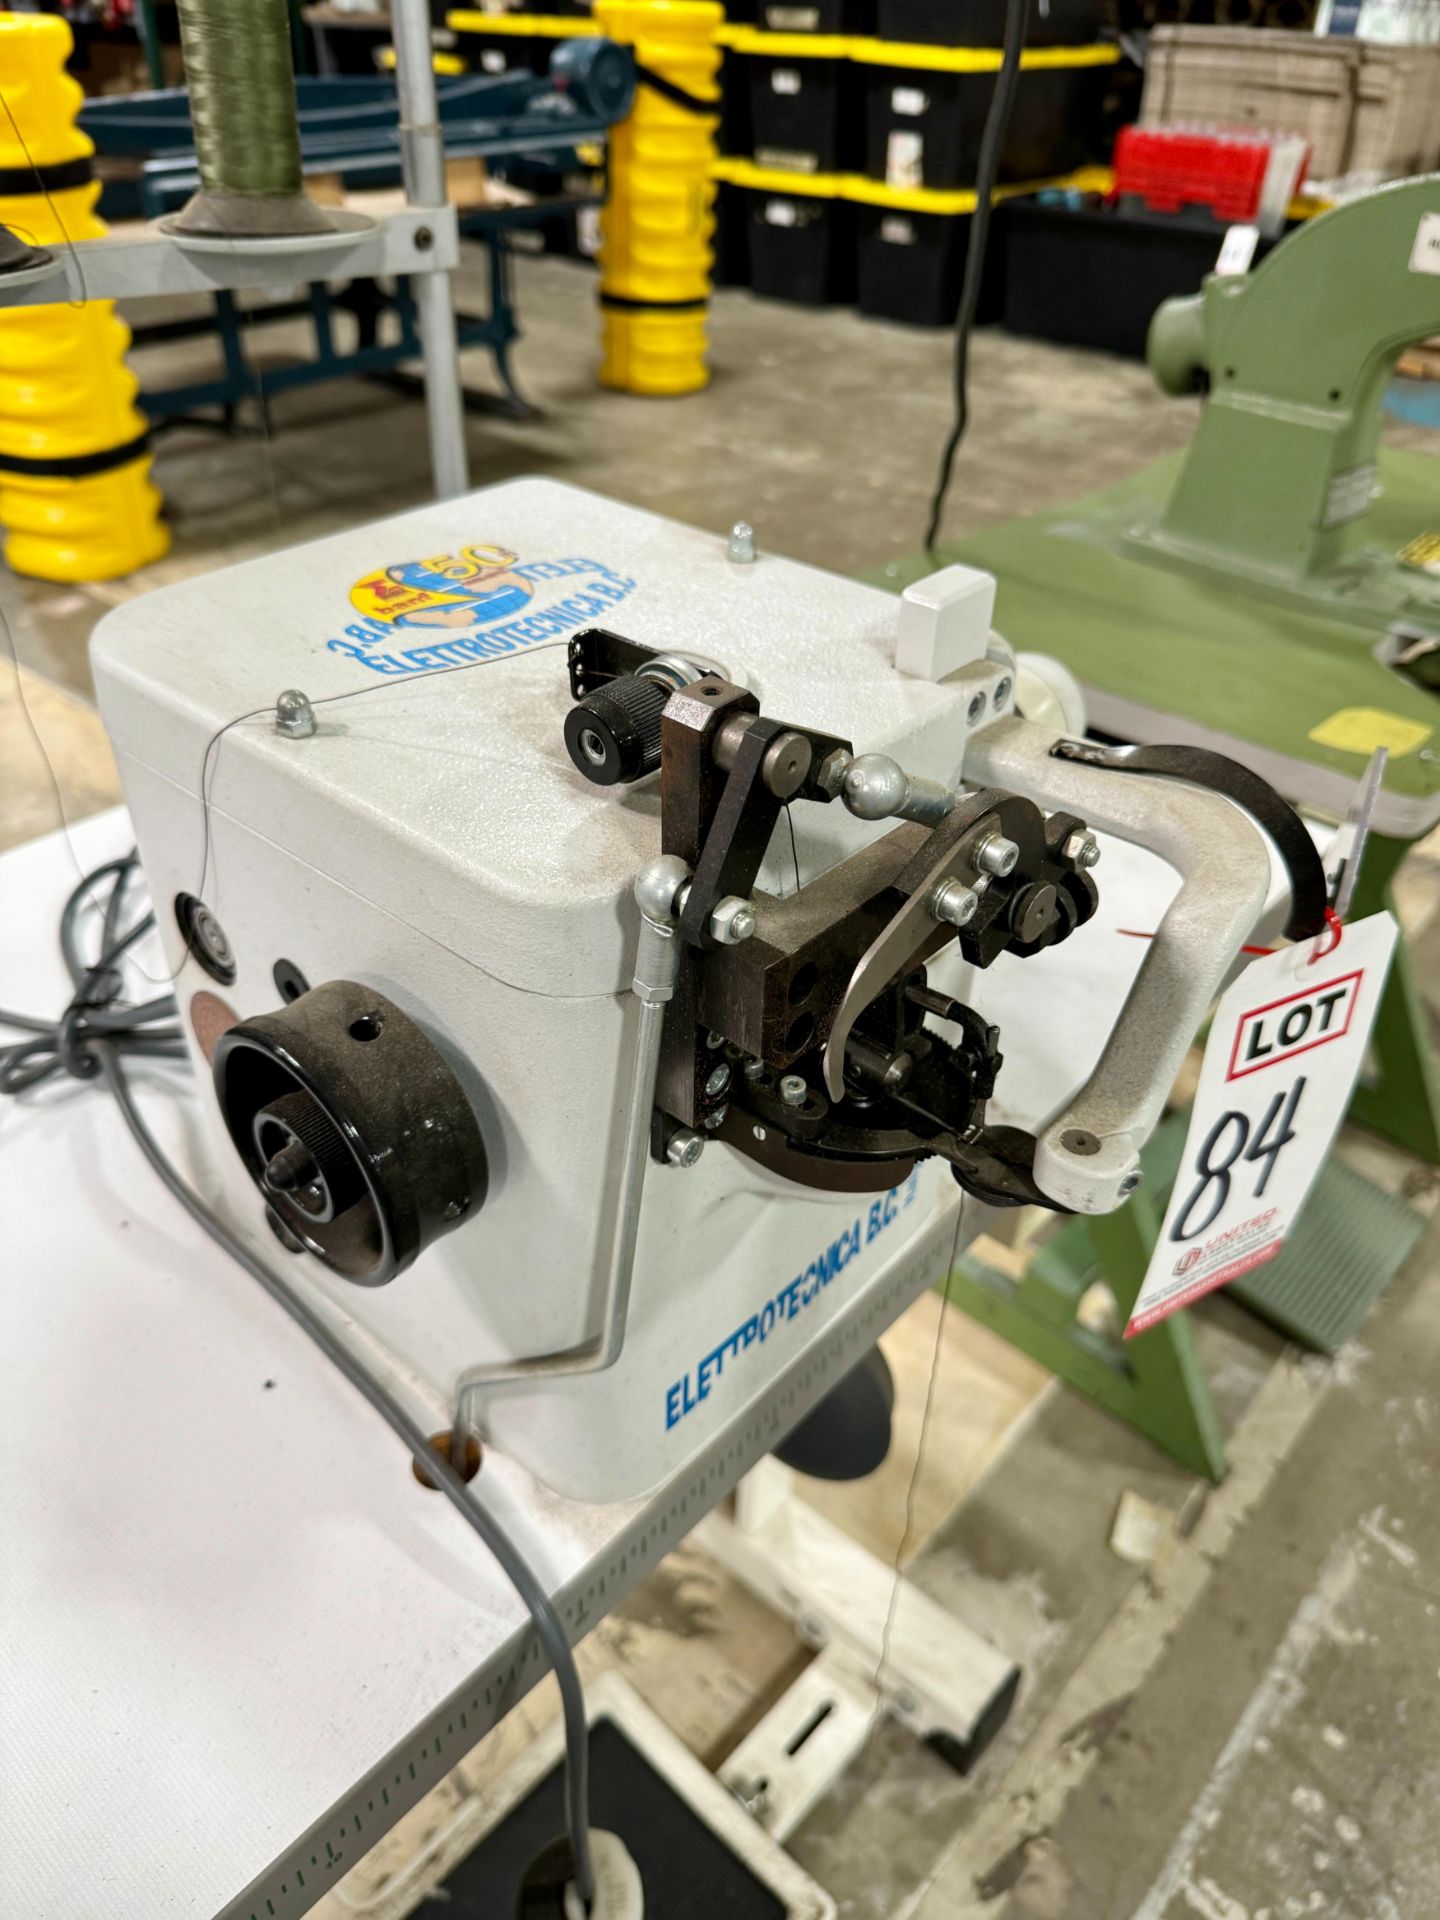 2019 ELETTROTECNICA B.C. STROBEL MACHINE, MODEL 441-1, S/N 19/0003/1, SPECIALTY SEWING MACHINE FOR - Image 3 of 4